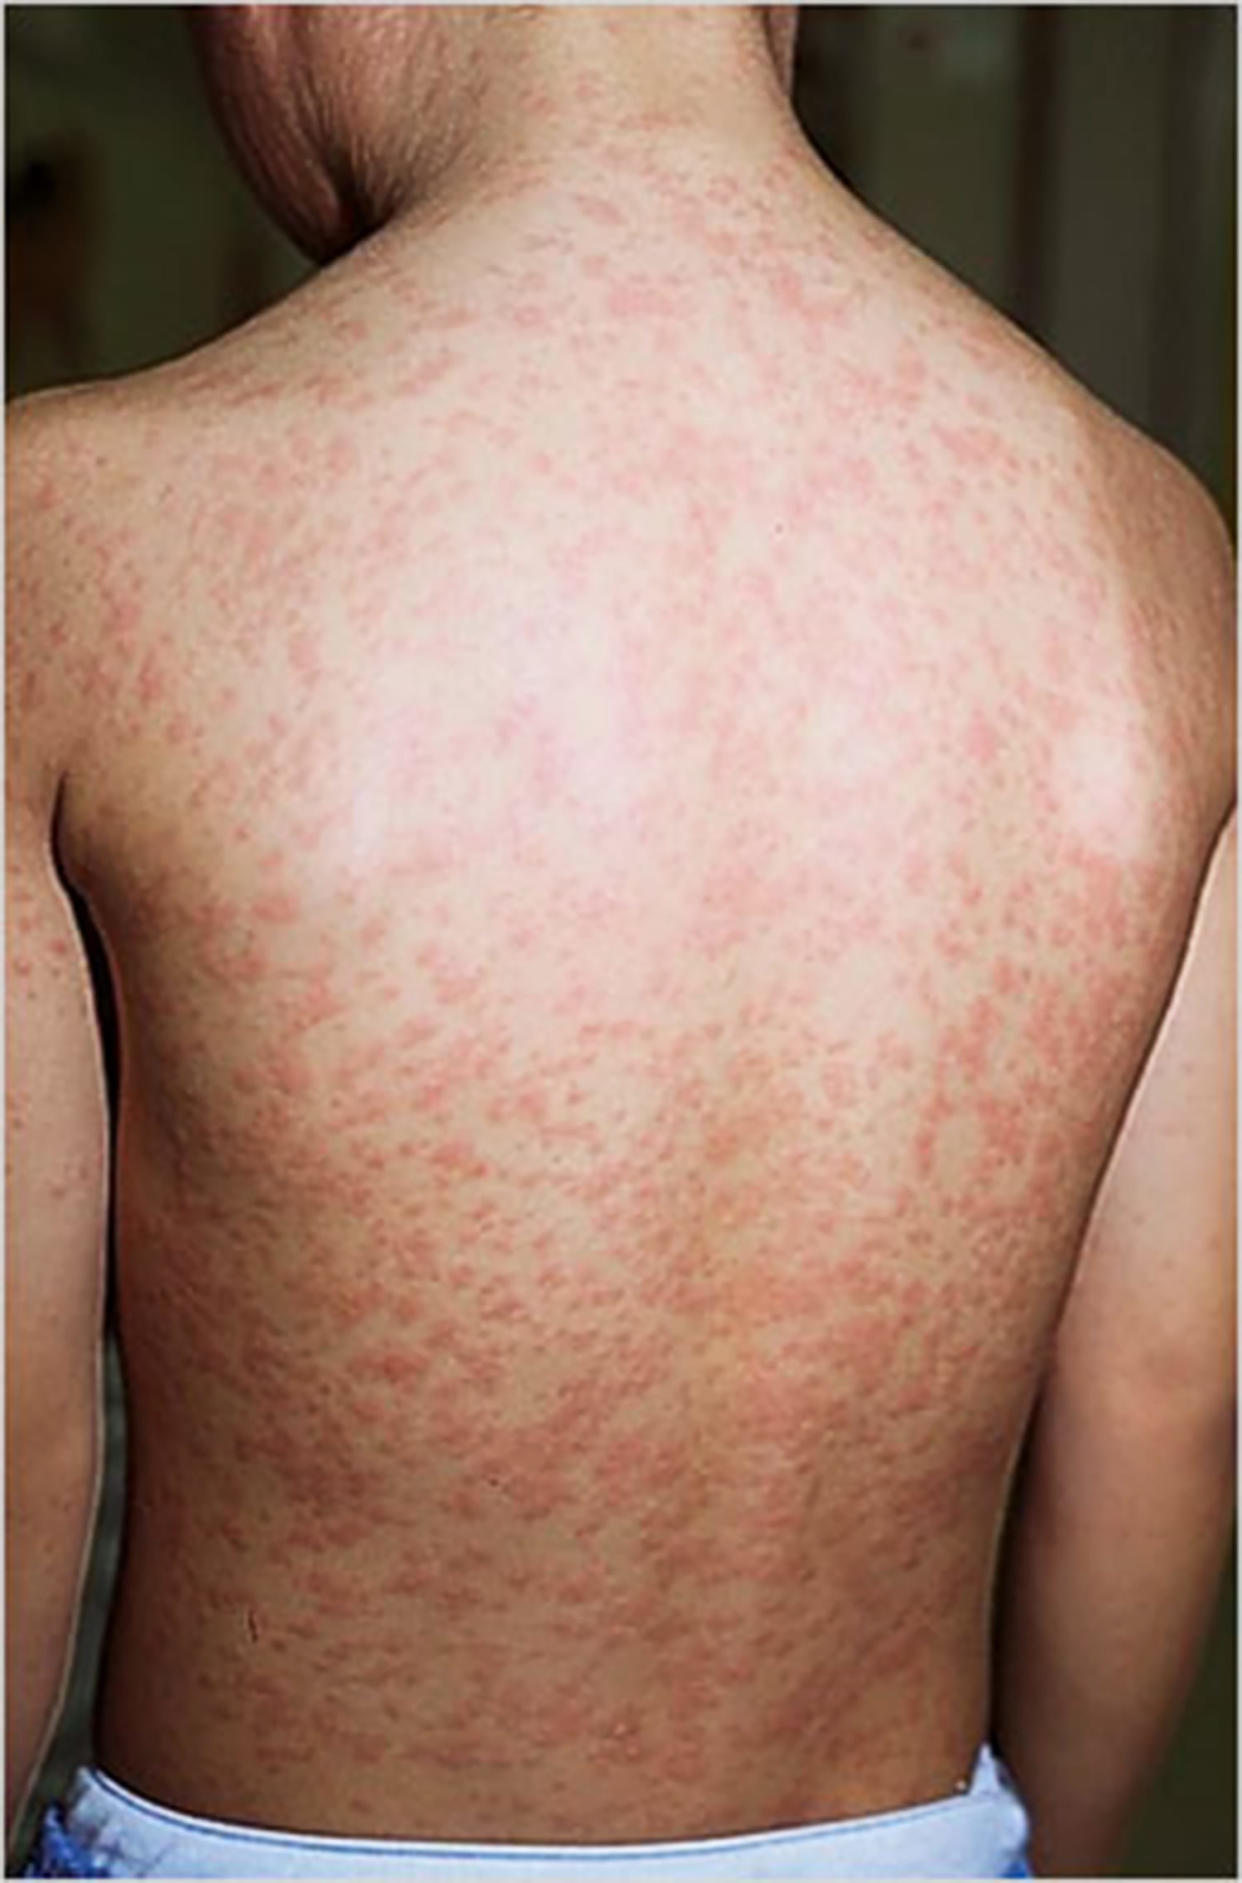 A measles rash. (Courtesy Centers for Disease Control and Prevention )